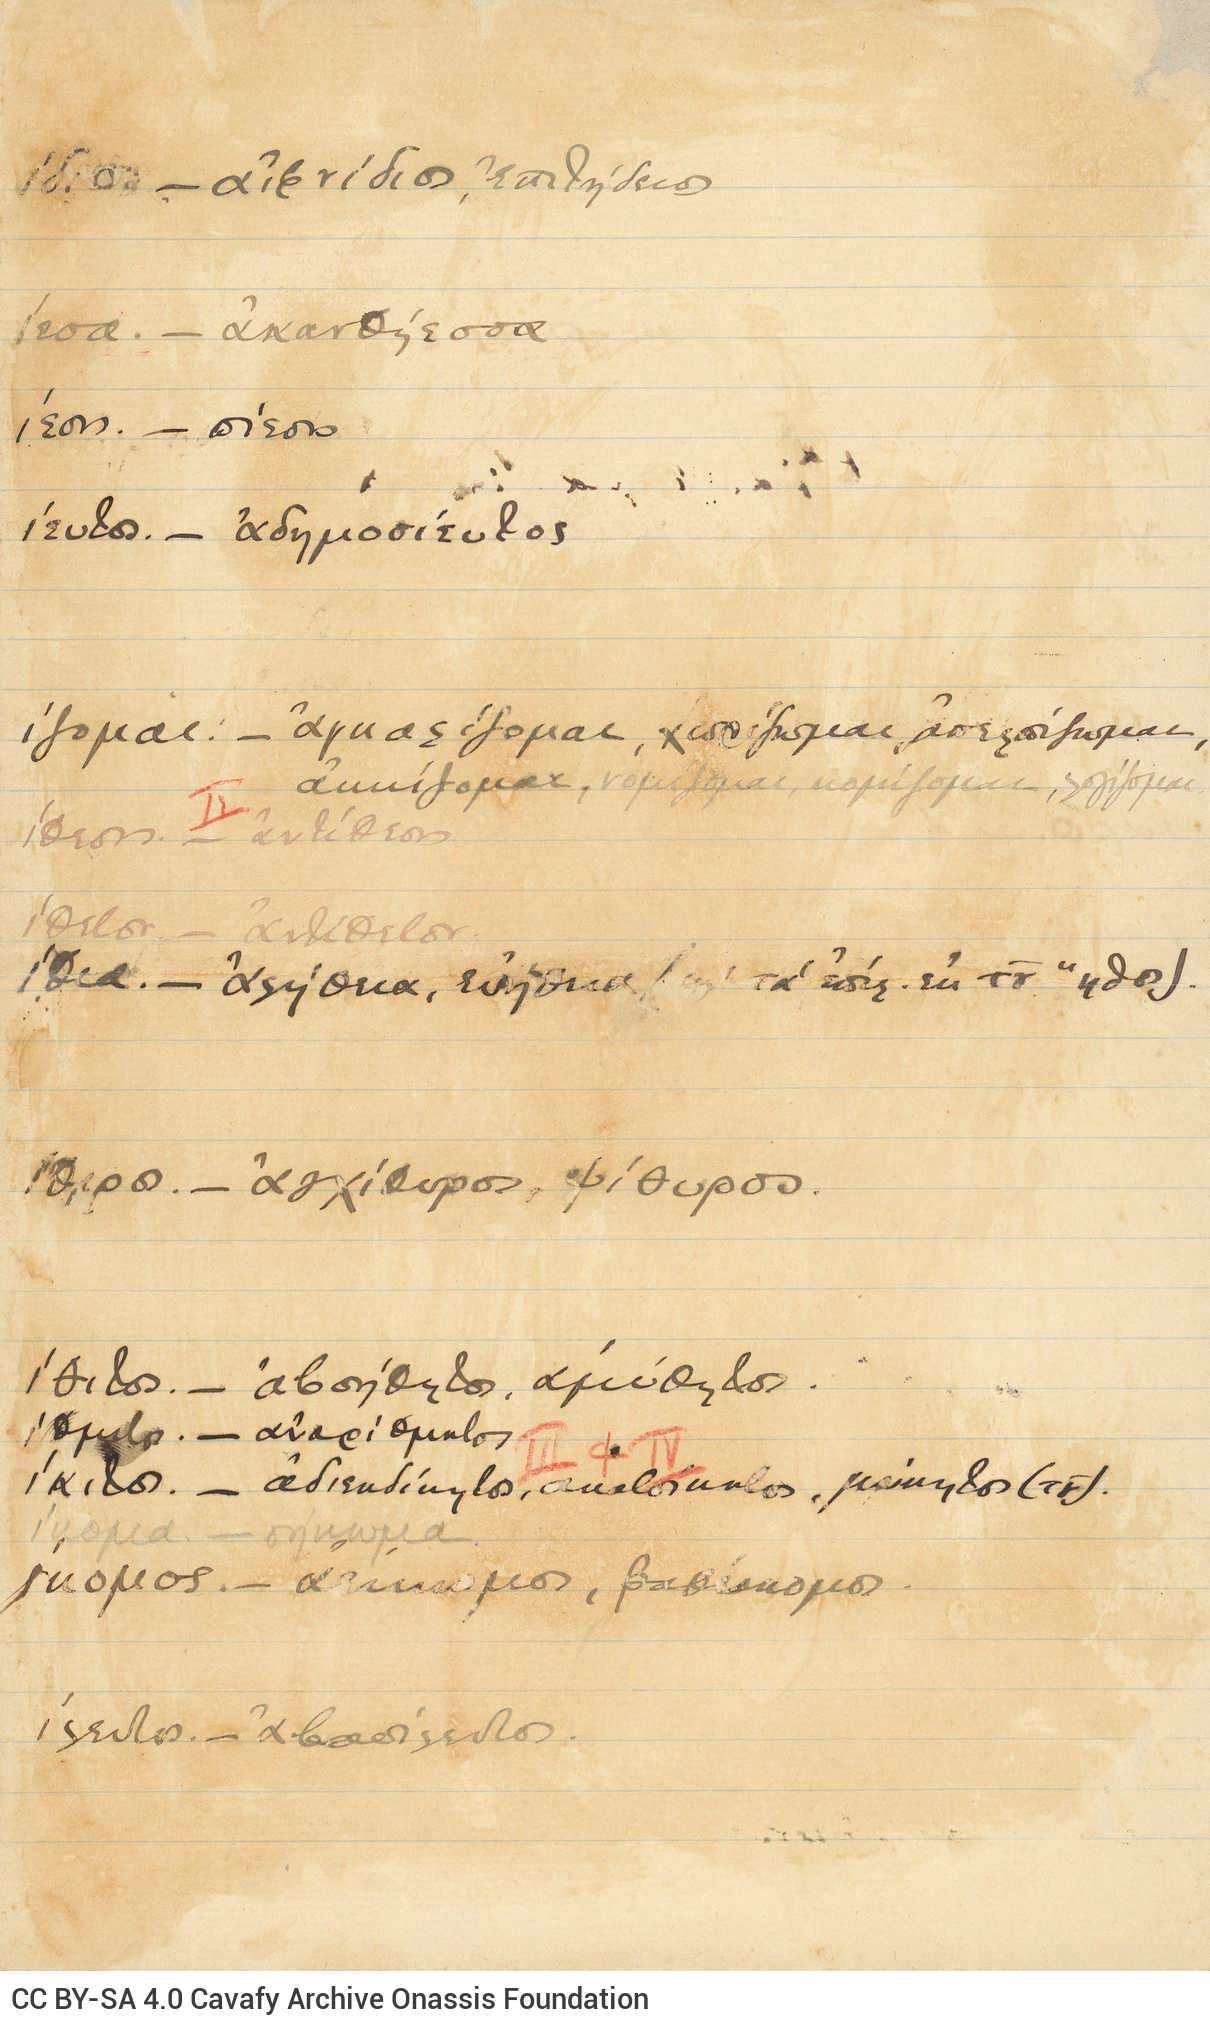 Handwritten list on 12 sheets, 6 double sheet notepapers and 7 half-sheets, with phonetic transliterations of word endings